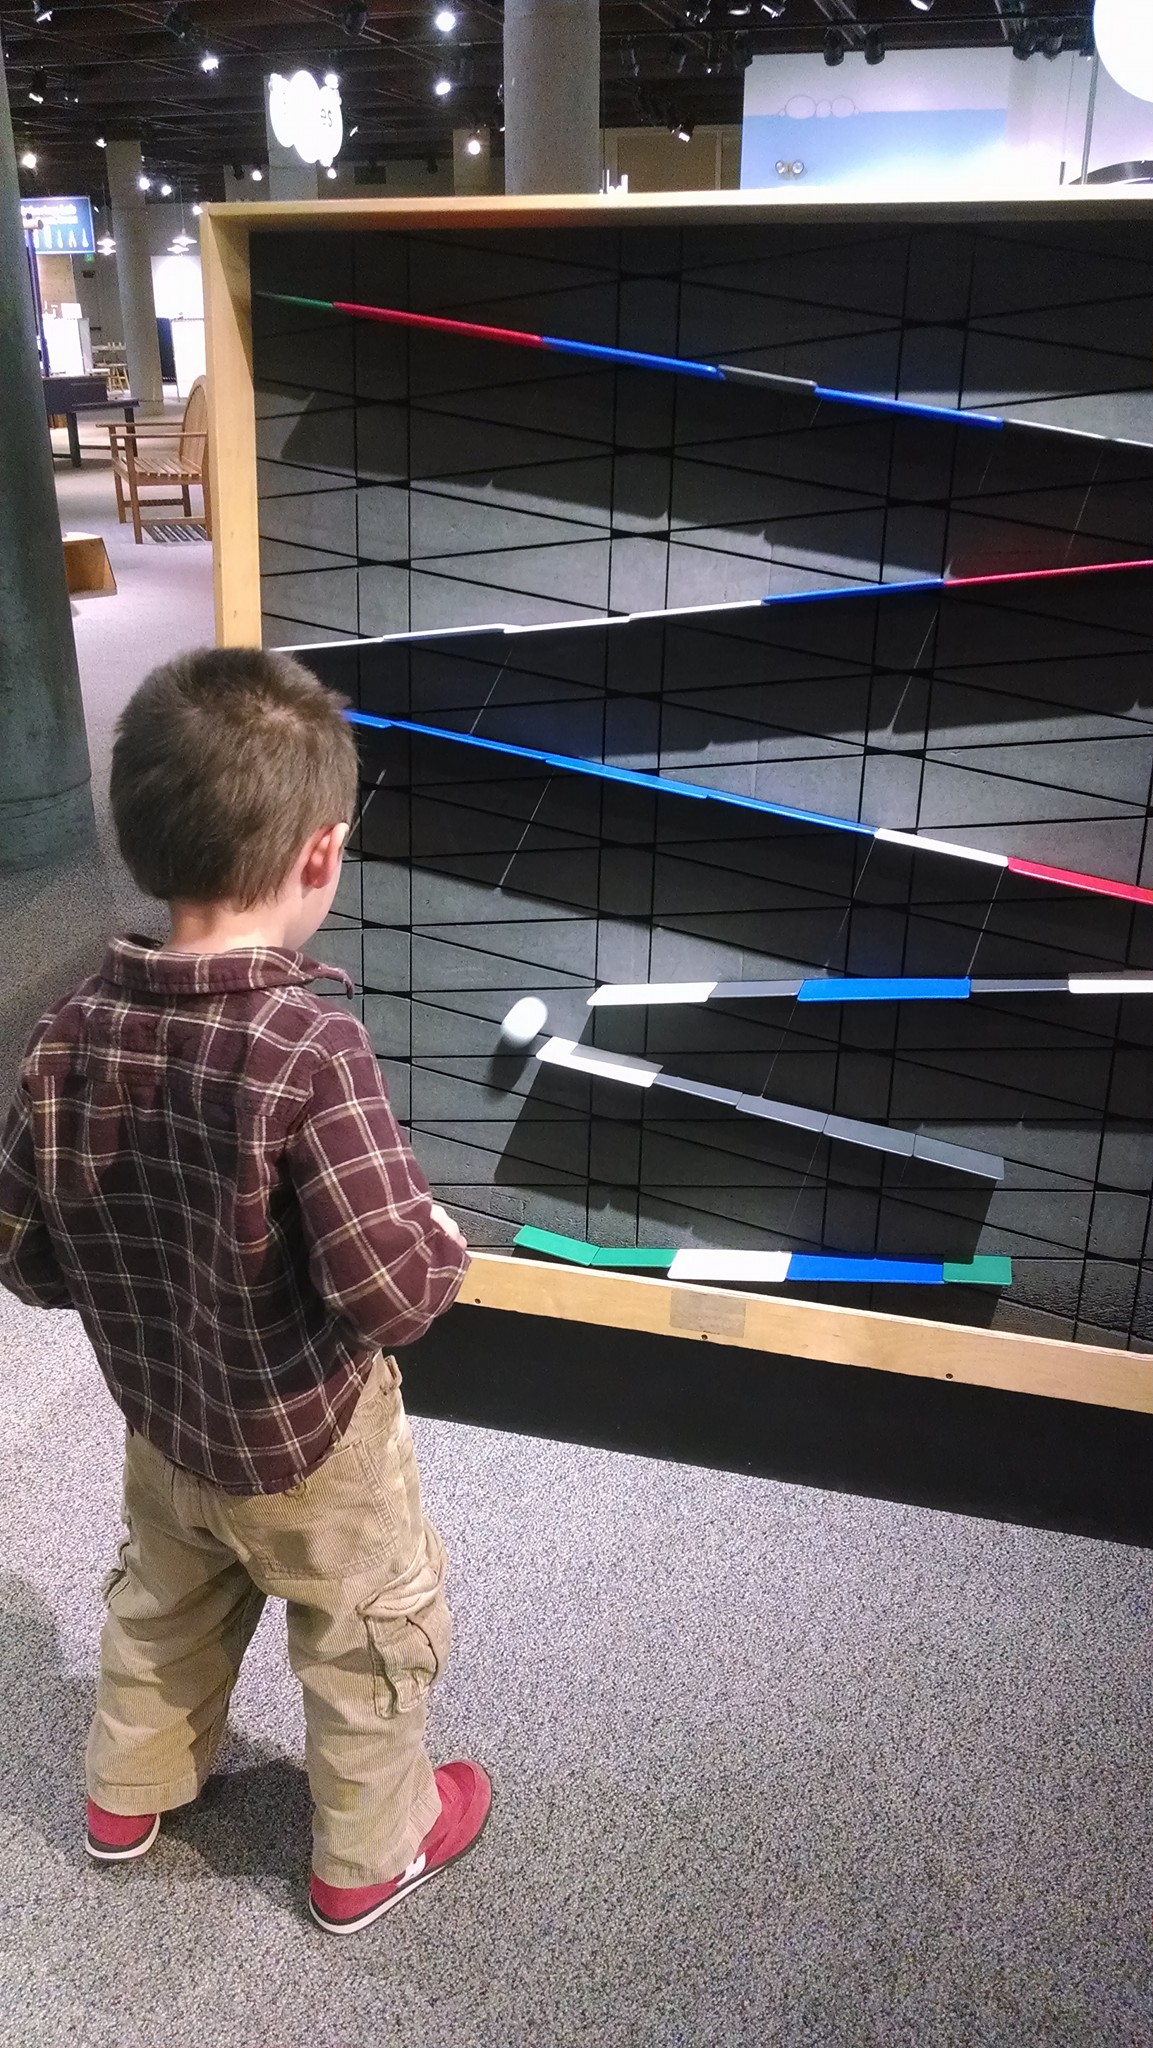 boy looking at ping pong ball falling off plastic ramps